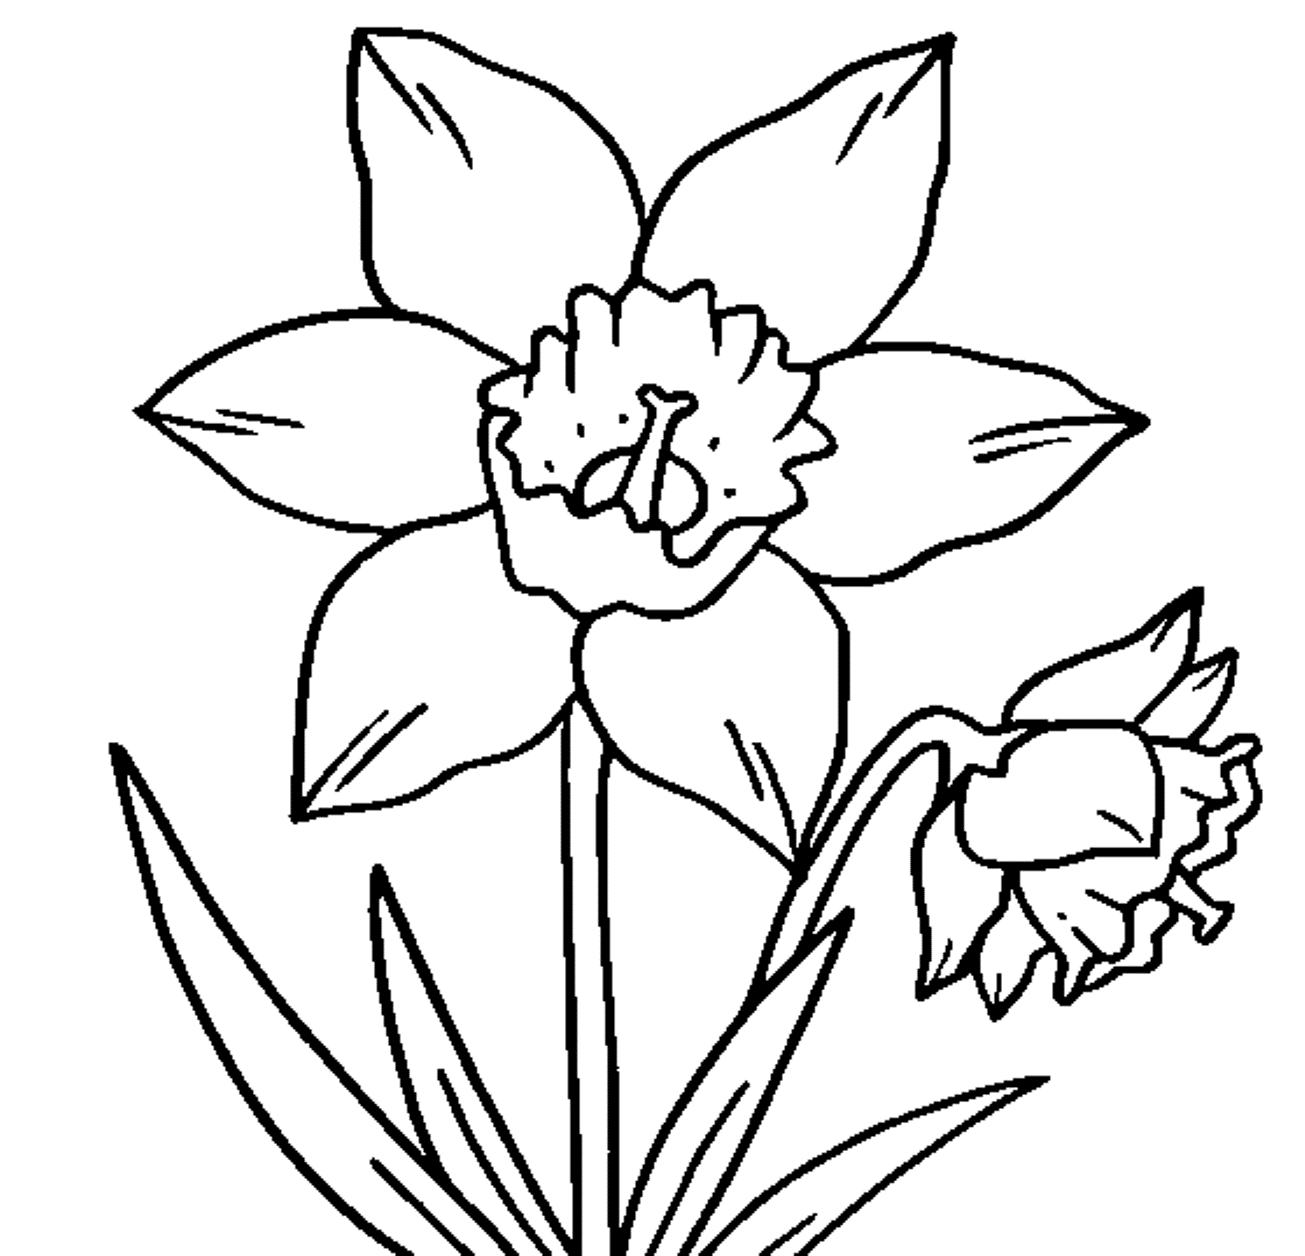 Printable Daffodil Flower Coloring Page - Flower Coloring pages of ...